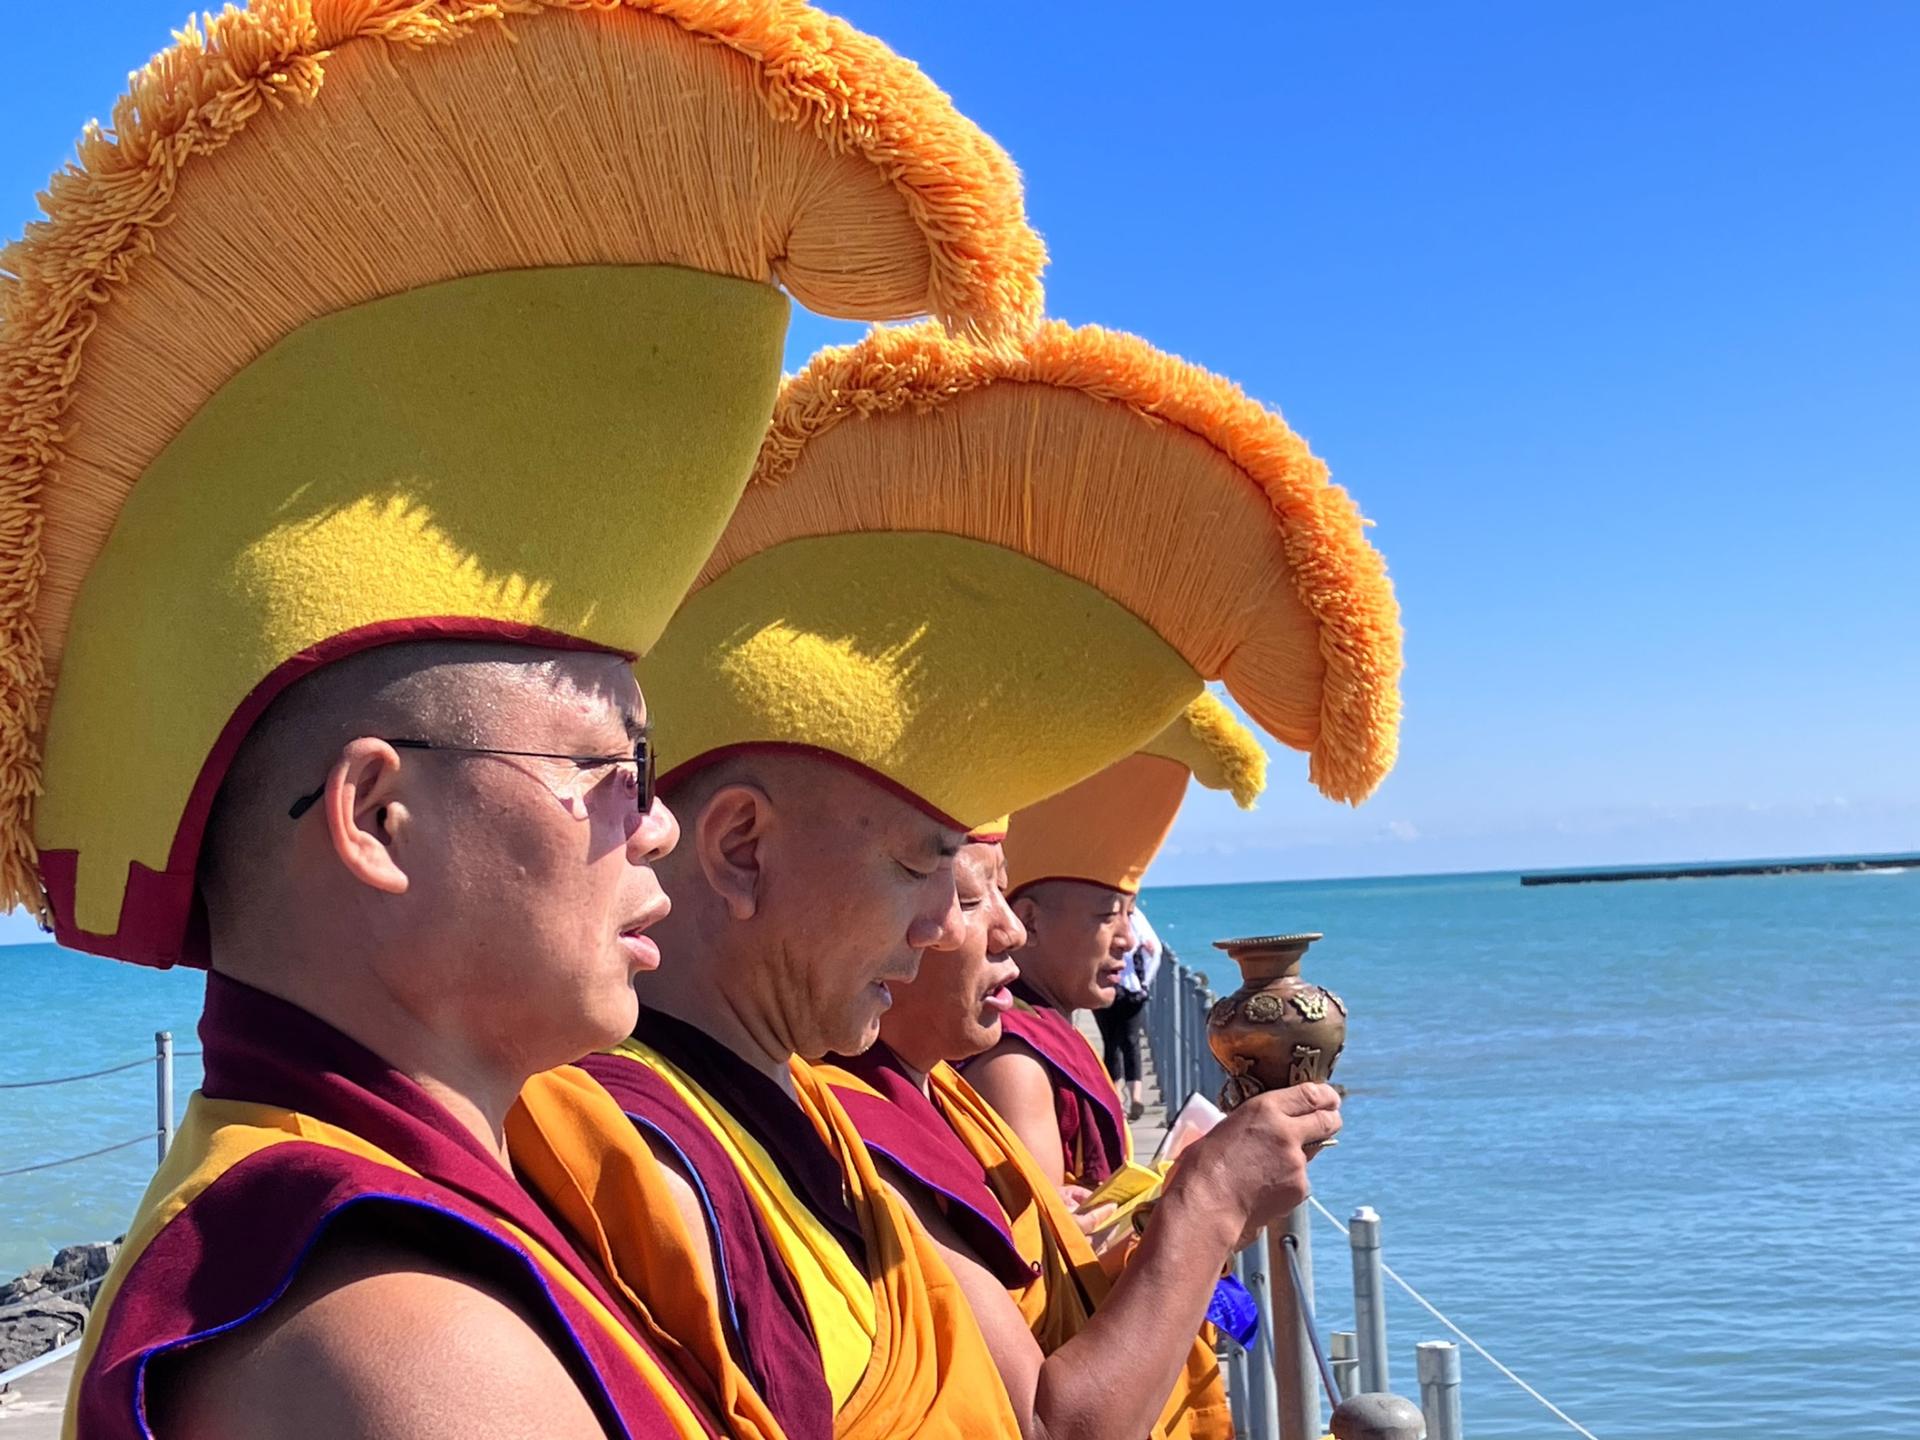 The monks release the remains of the sand mandala into the lake, with a prayer that their blessings may flow out into the world.